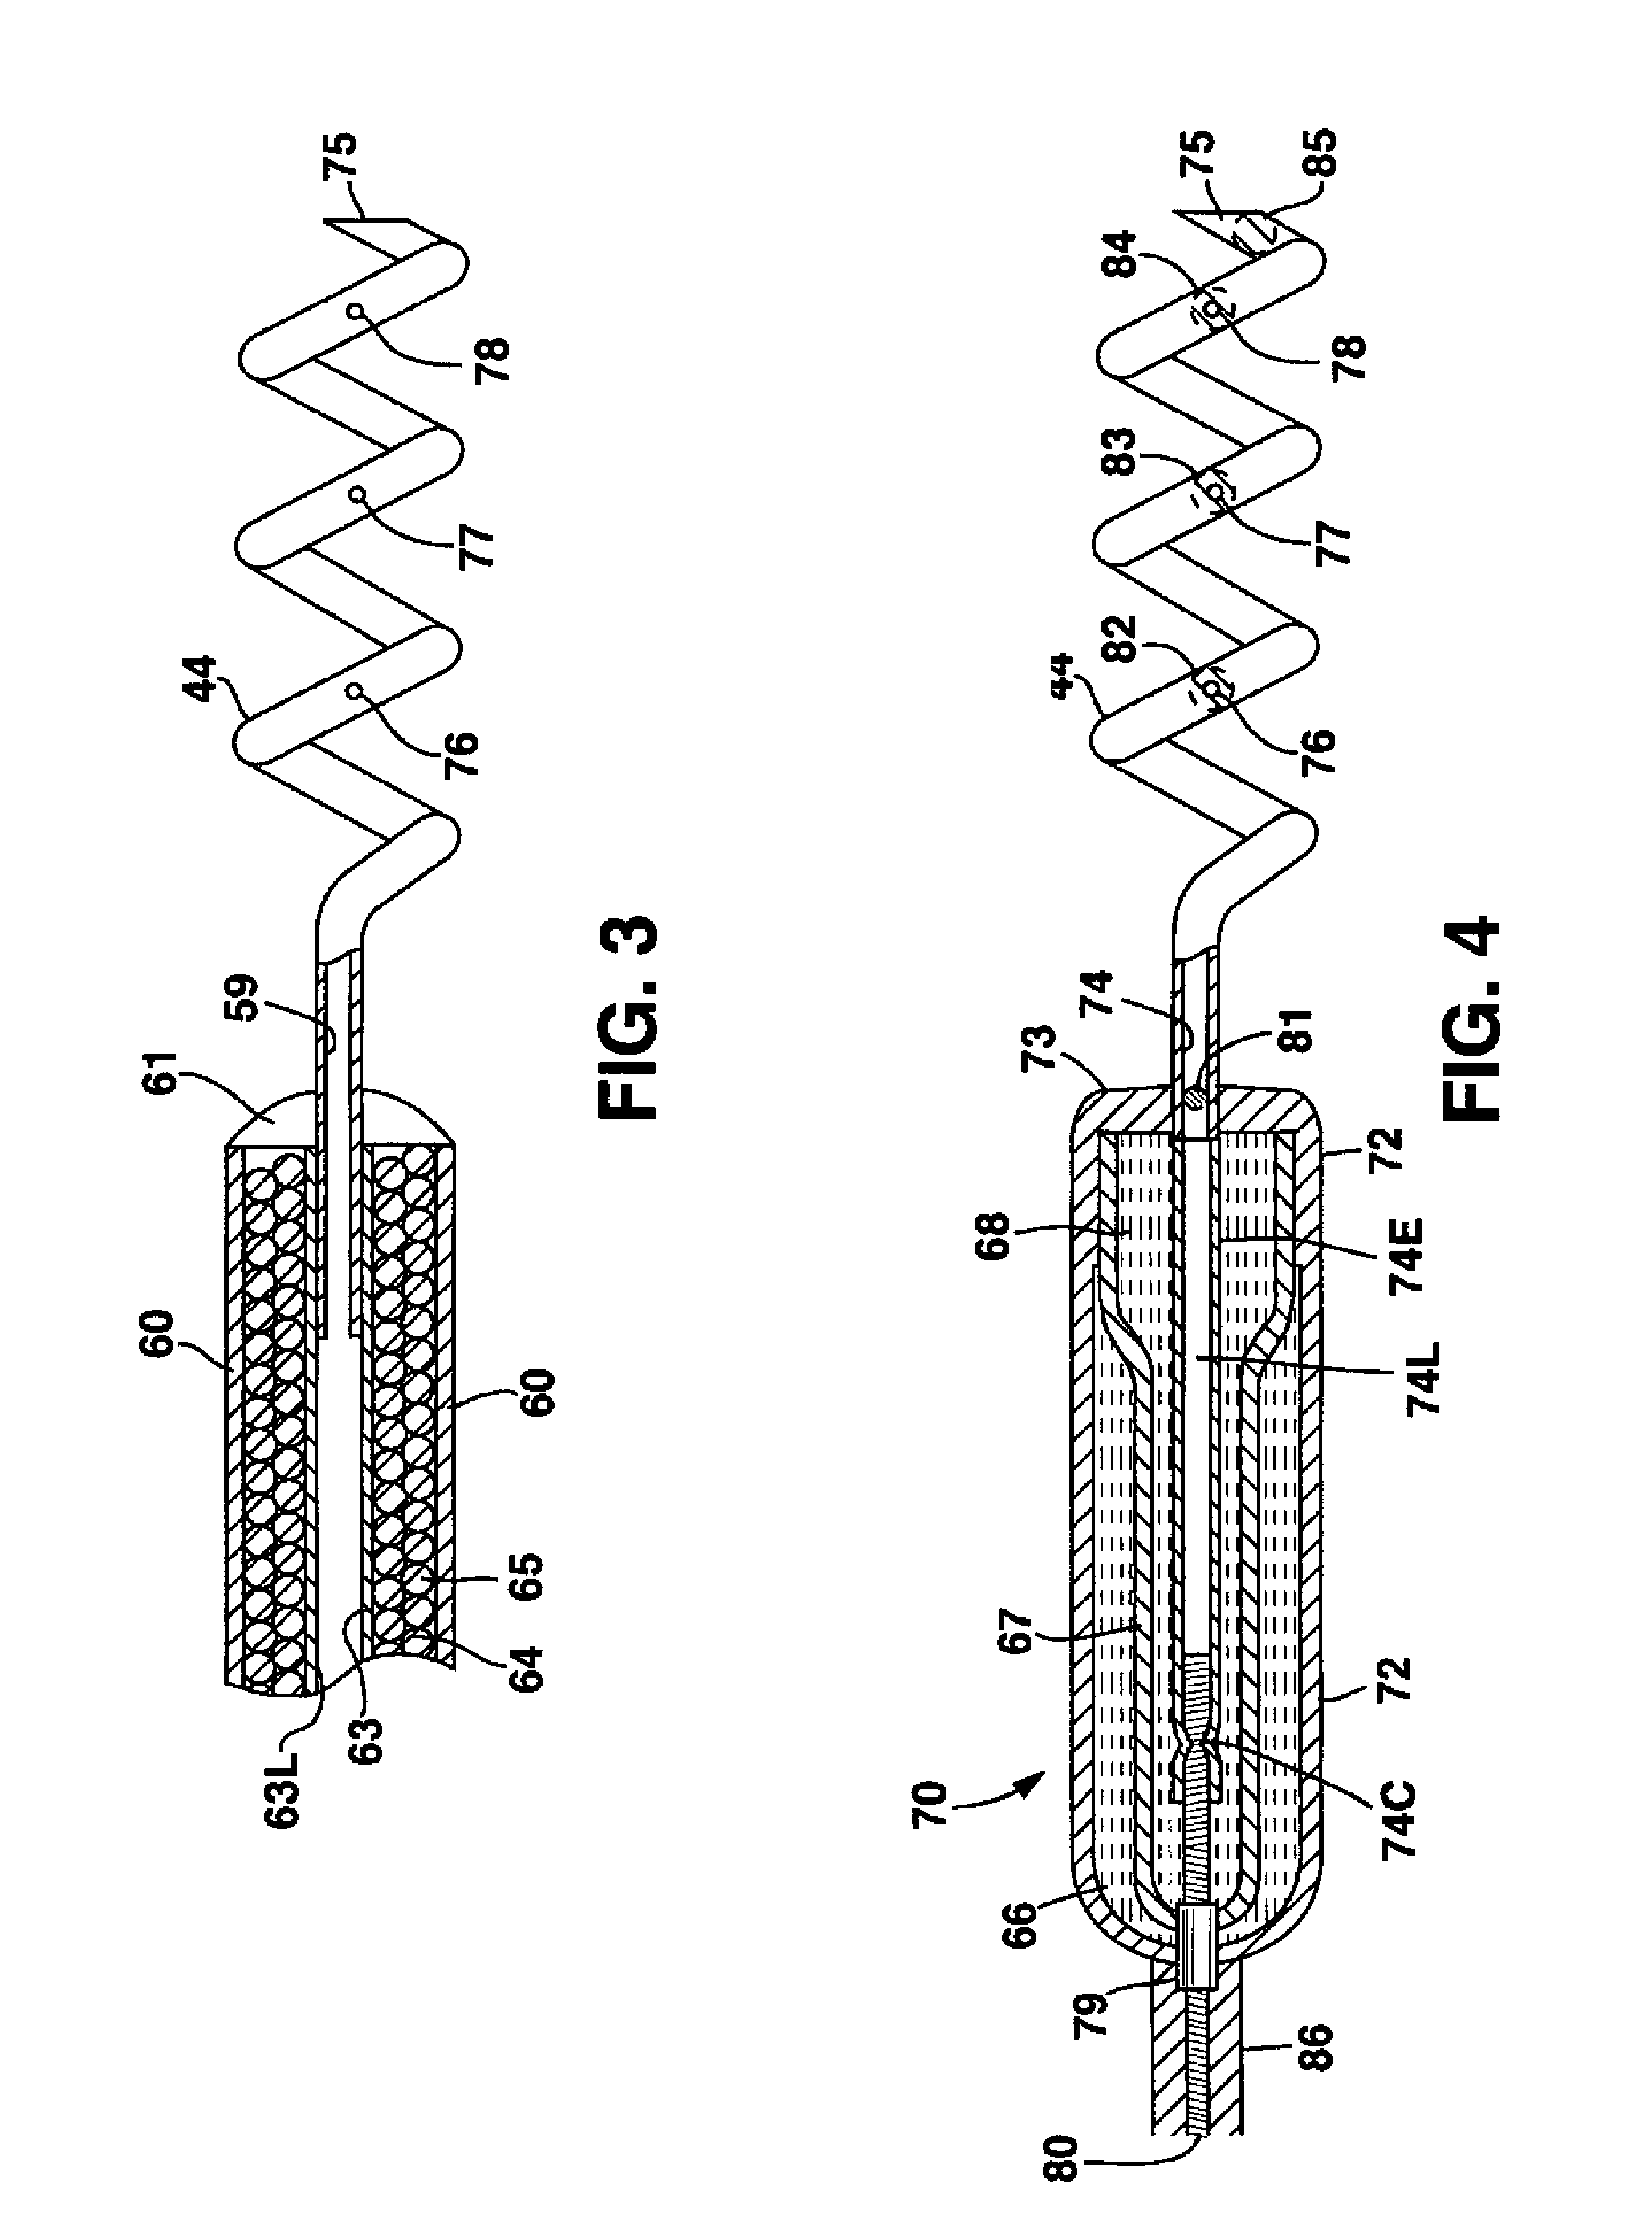 System and method for genetically treating cardiac conduction disturbances